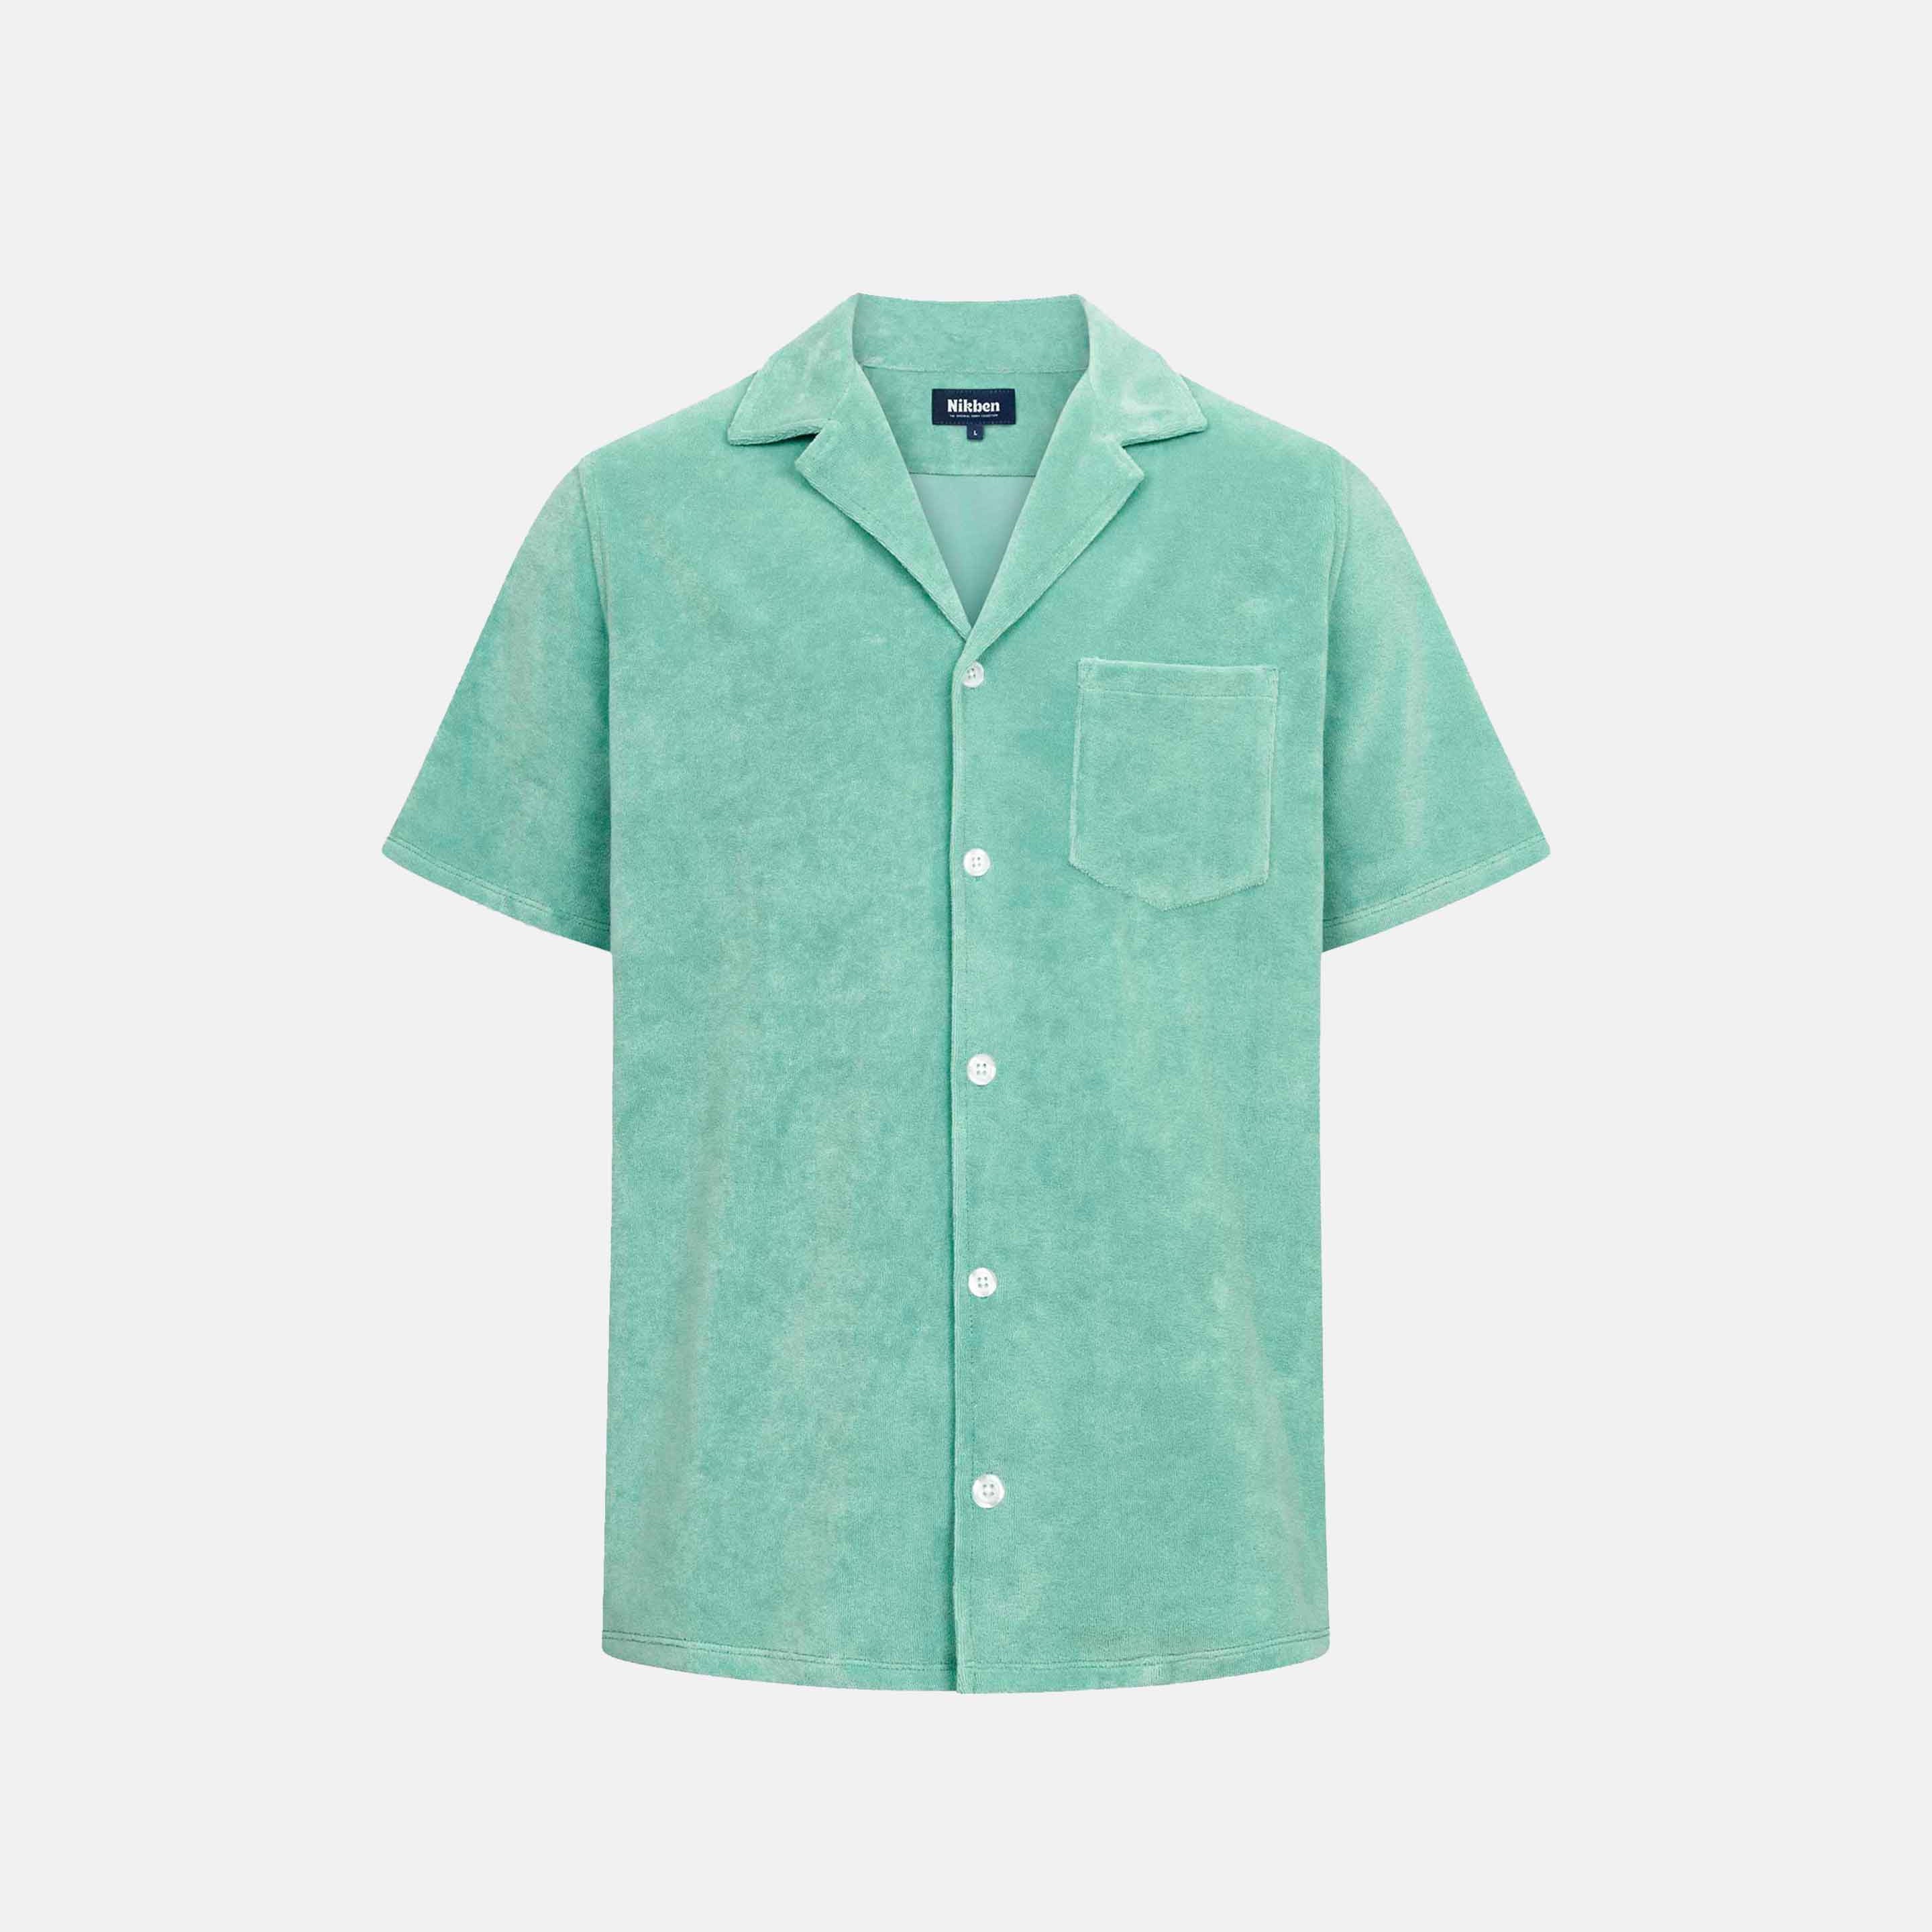 Grey-Green short sleeve shirt with white button closure and one chest pocket